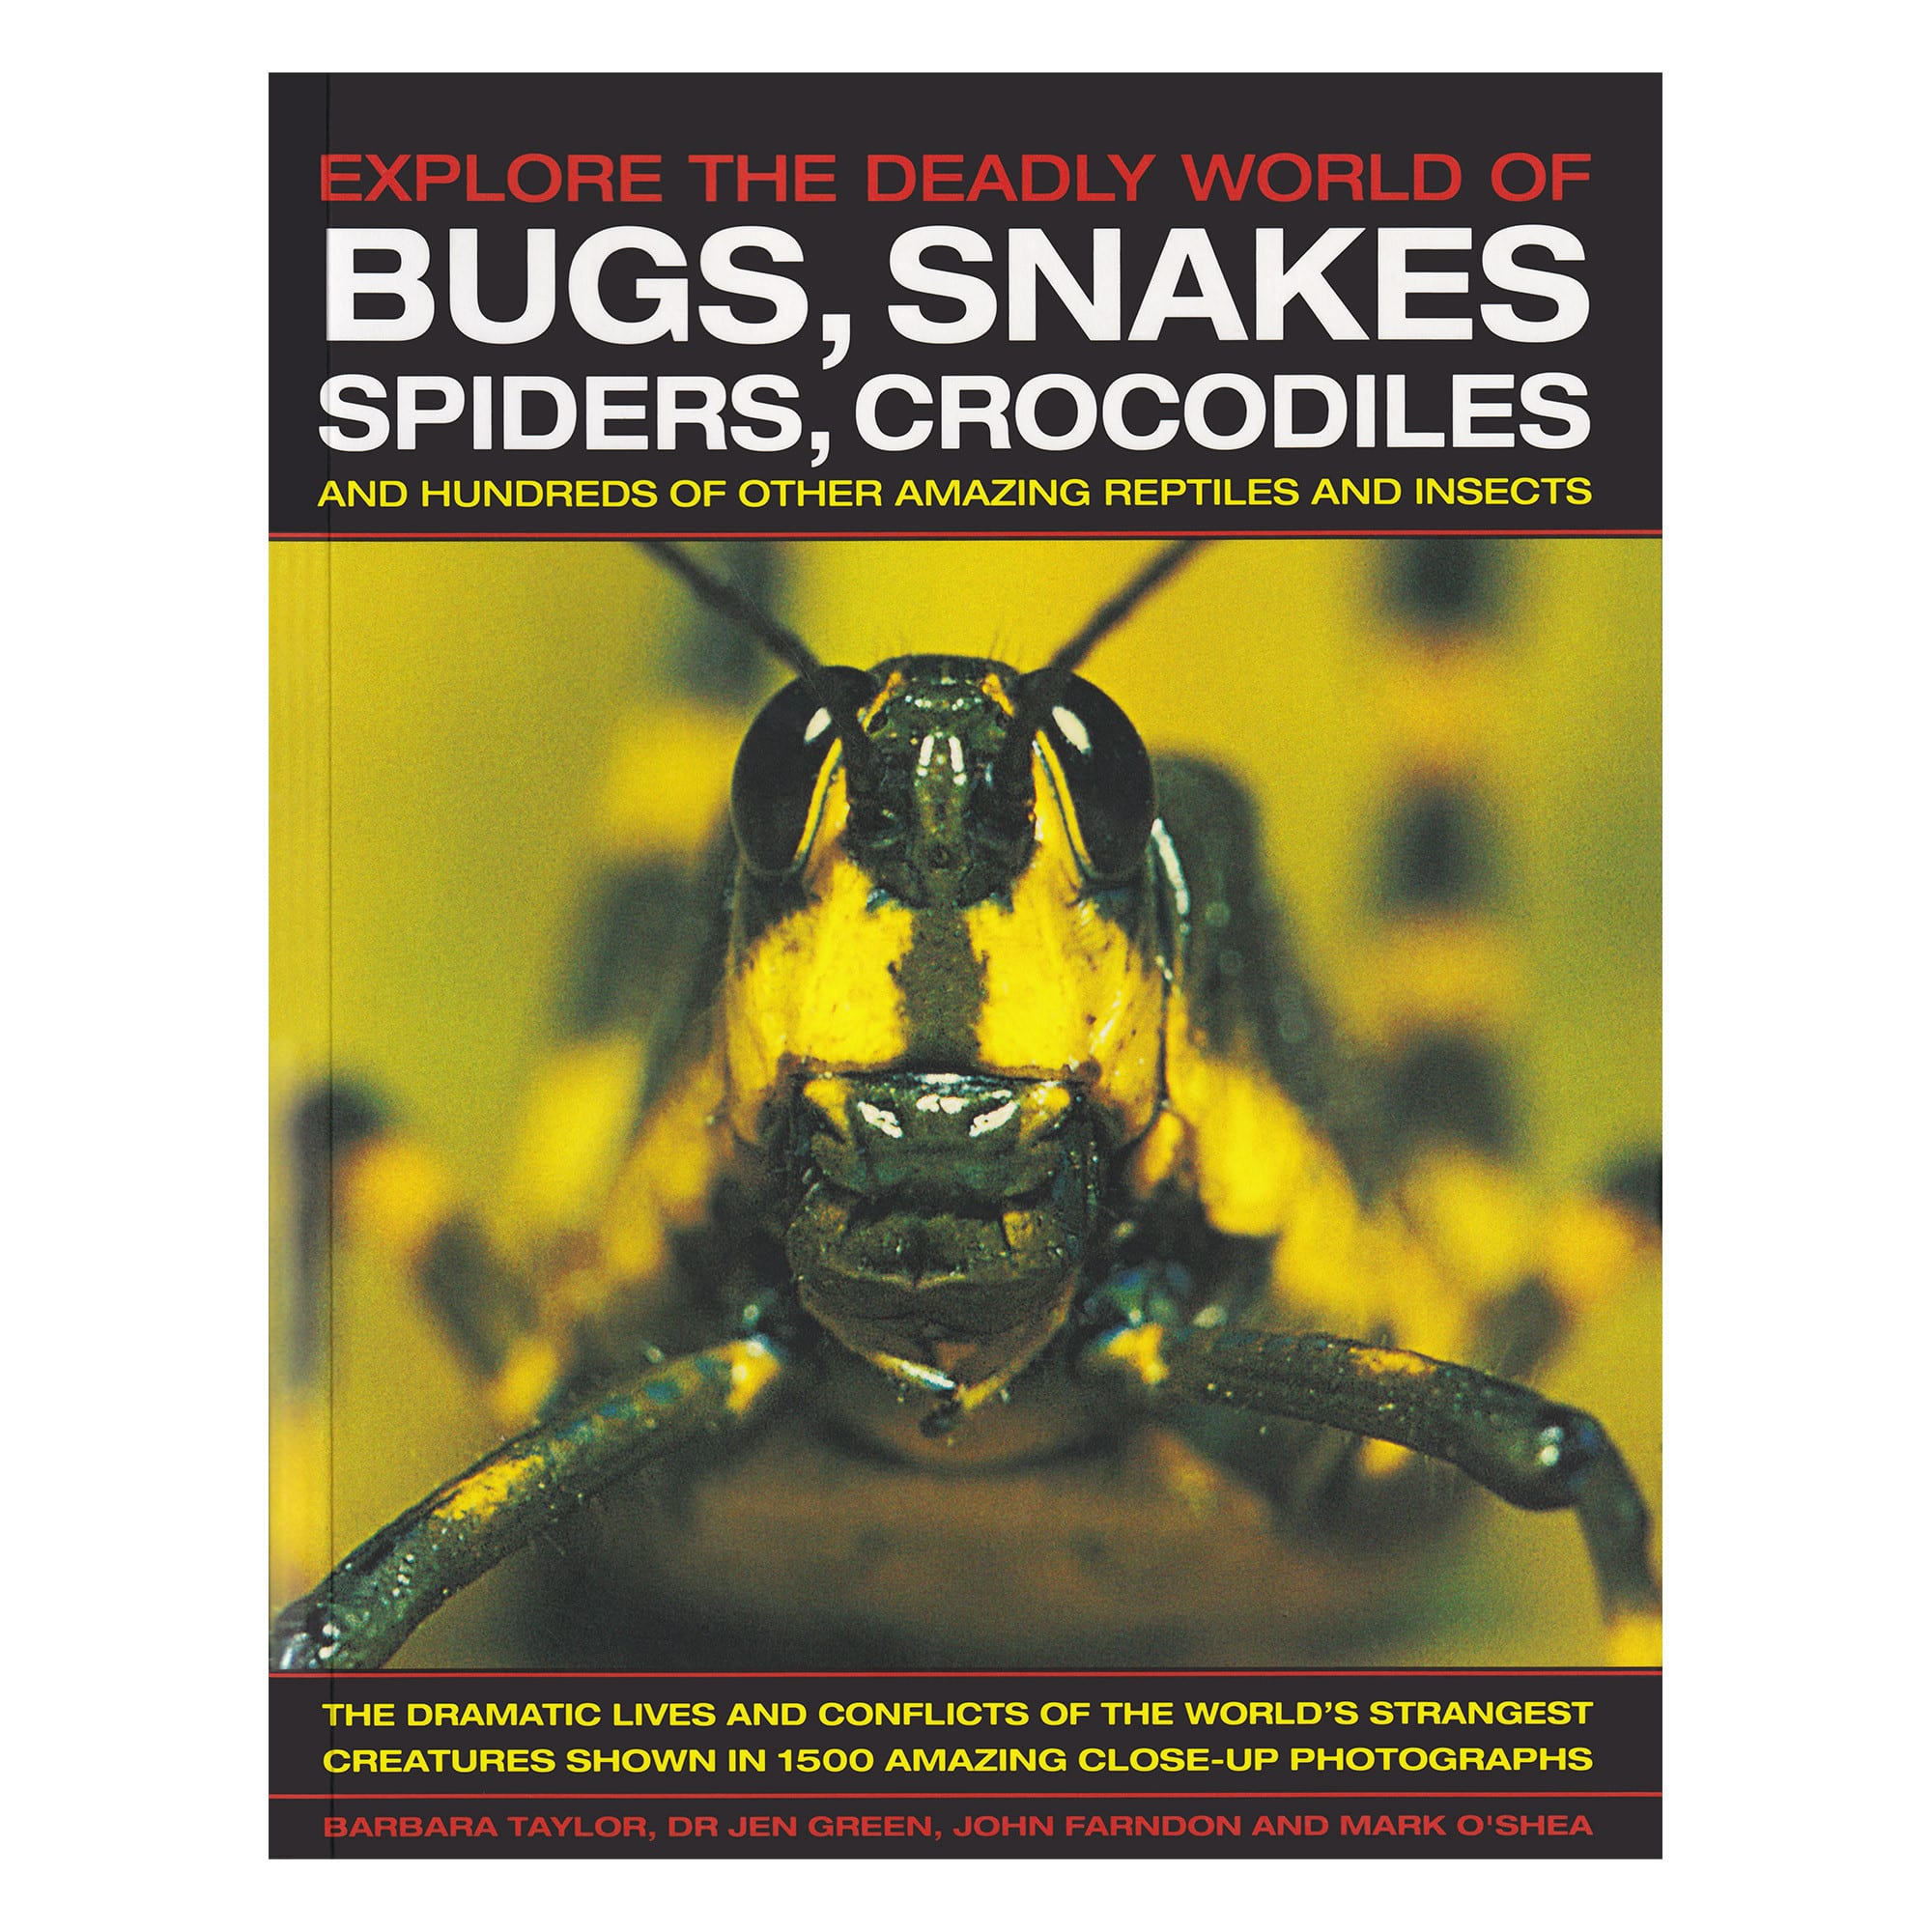 Explore The Deadly World Of Bugs, Snakes, Spiders, Crocodiles